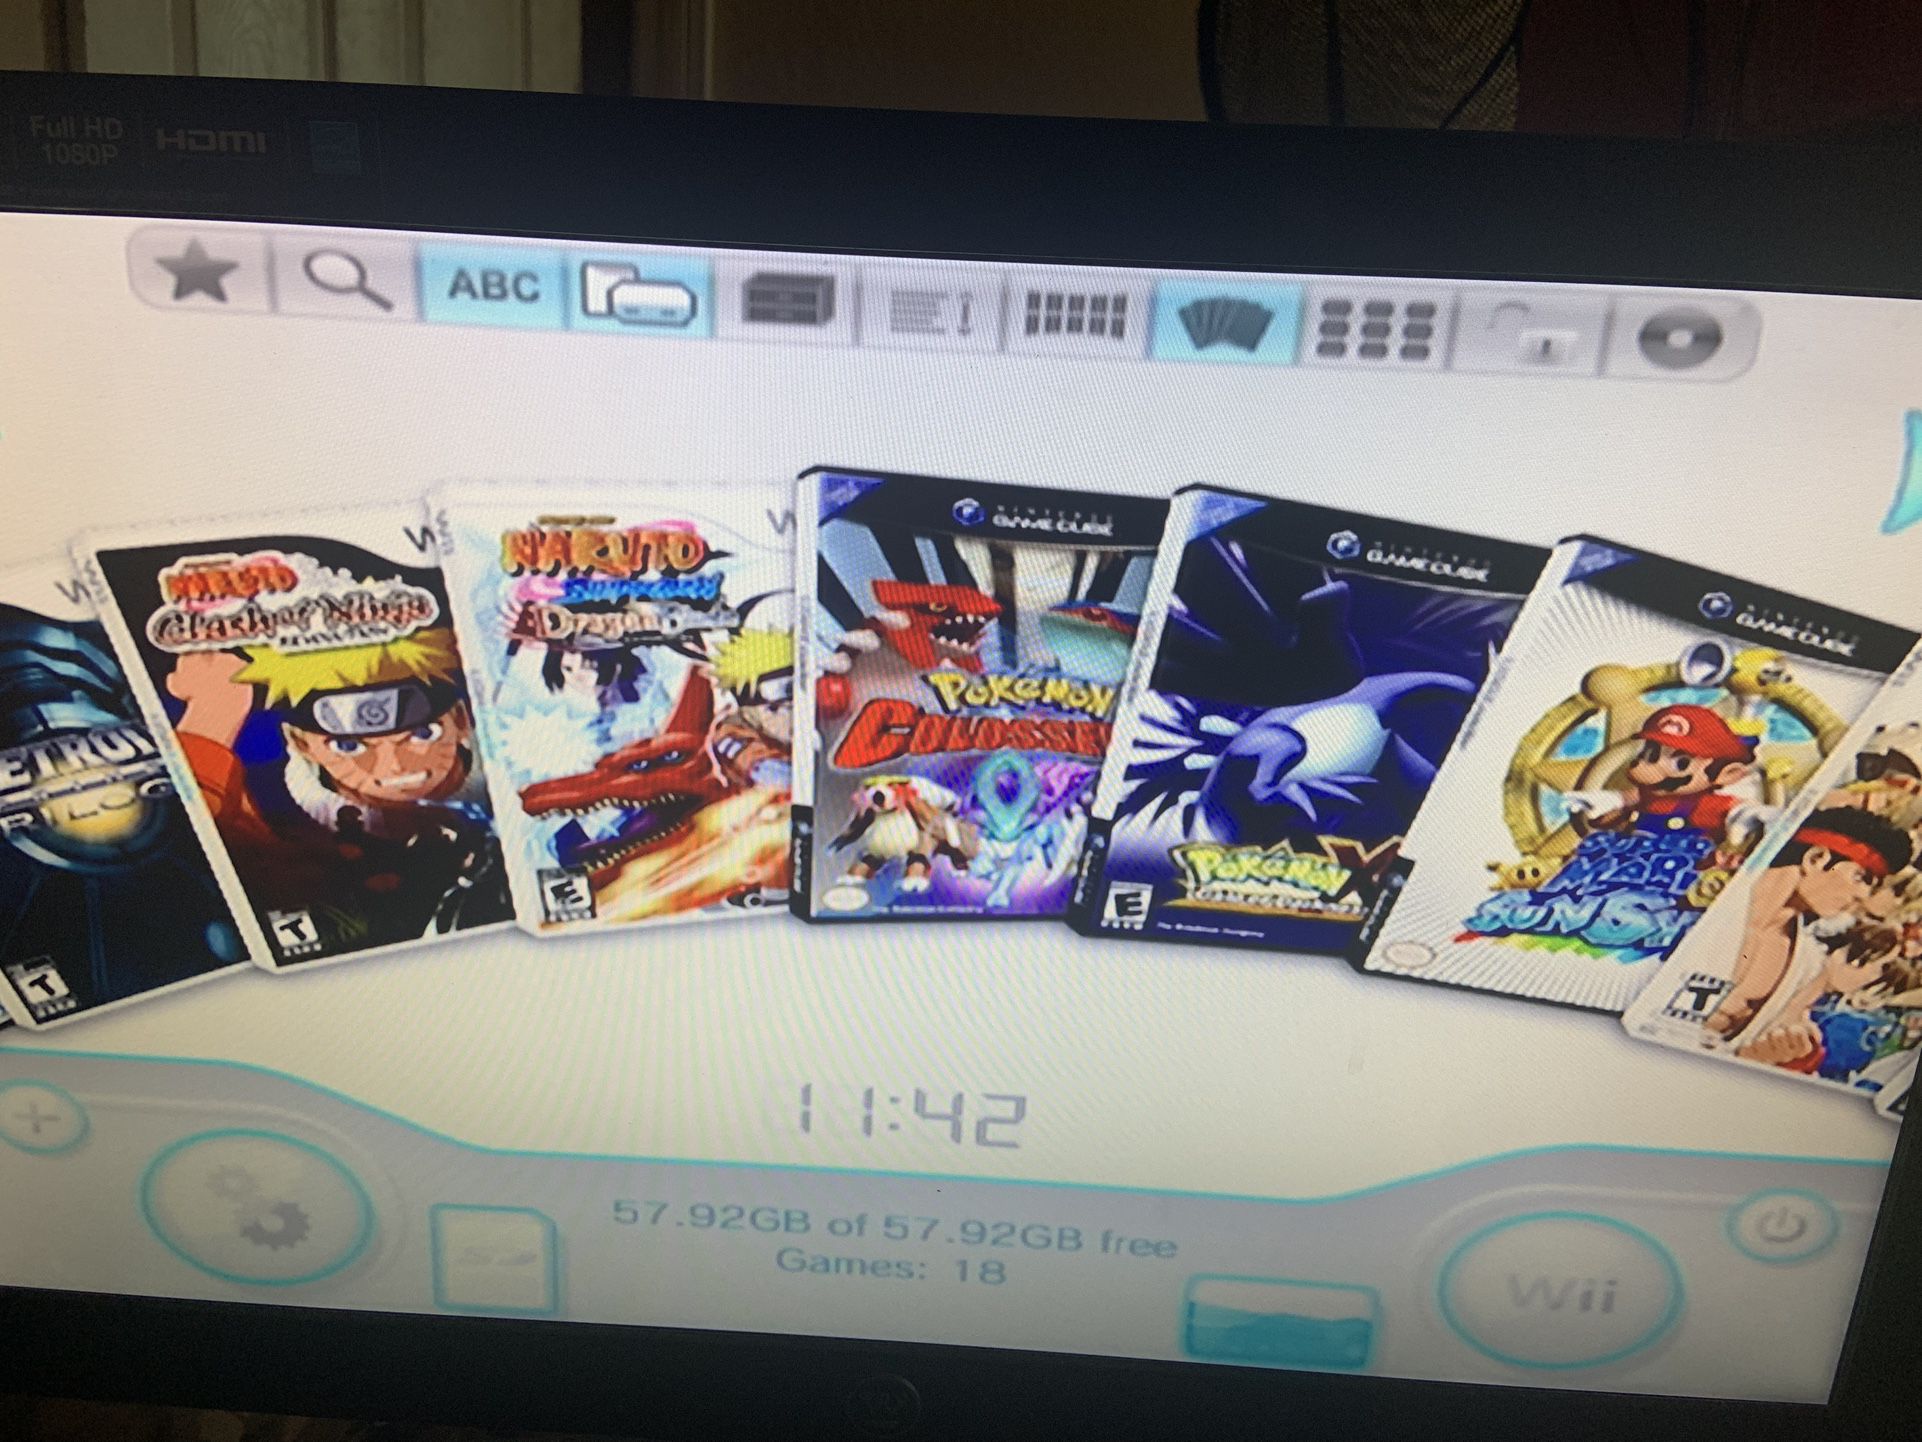 Mod Wii With Games